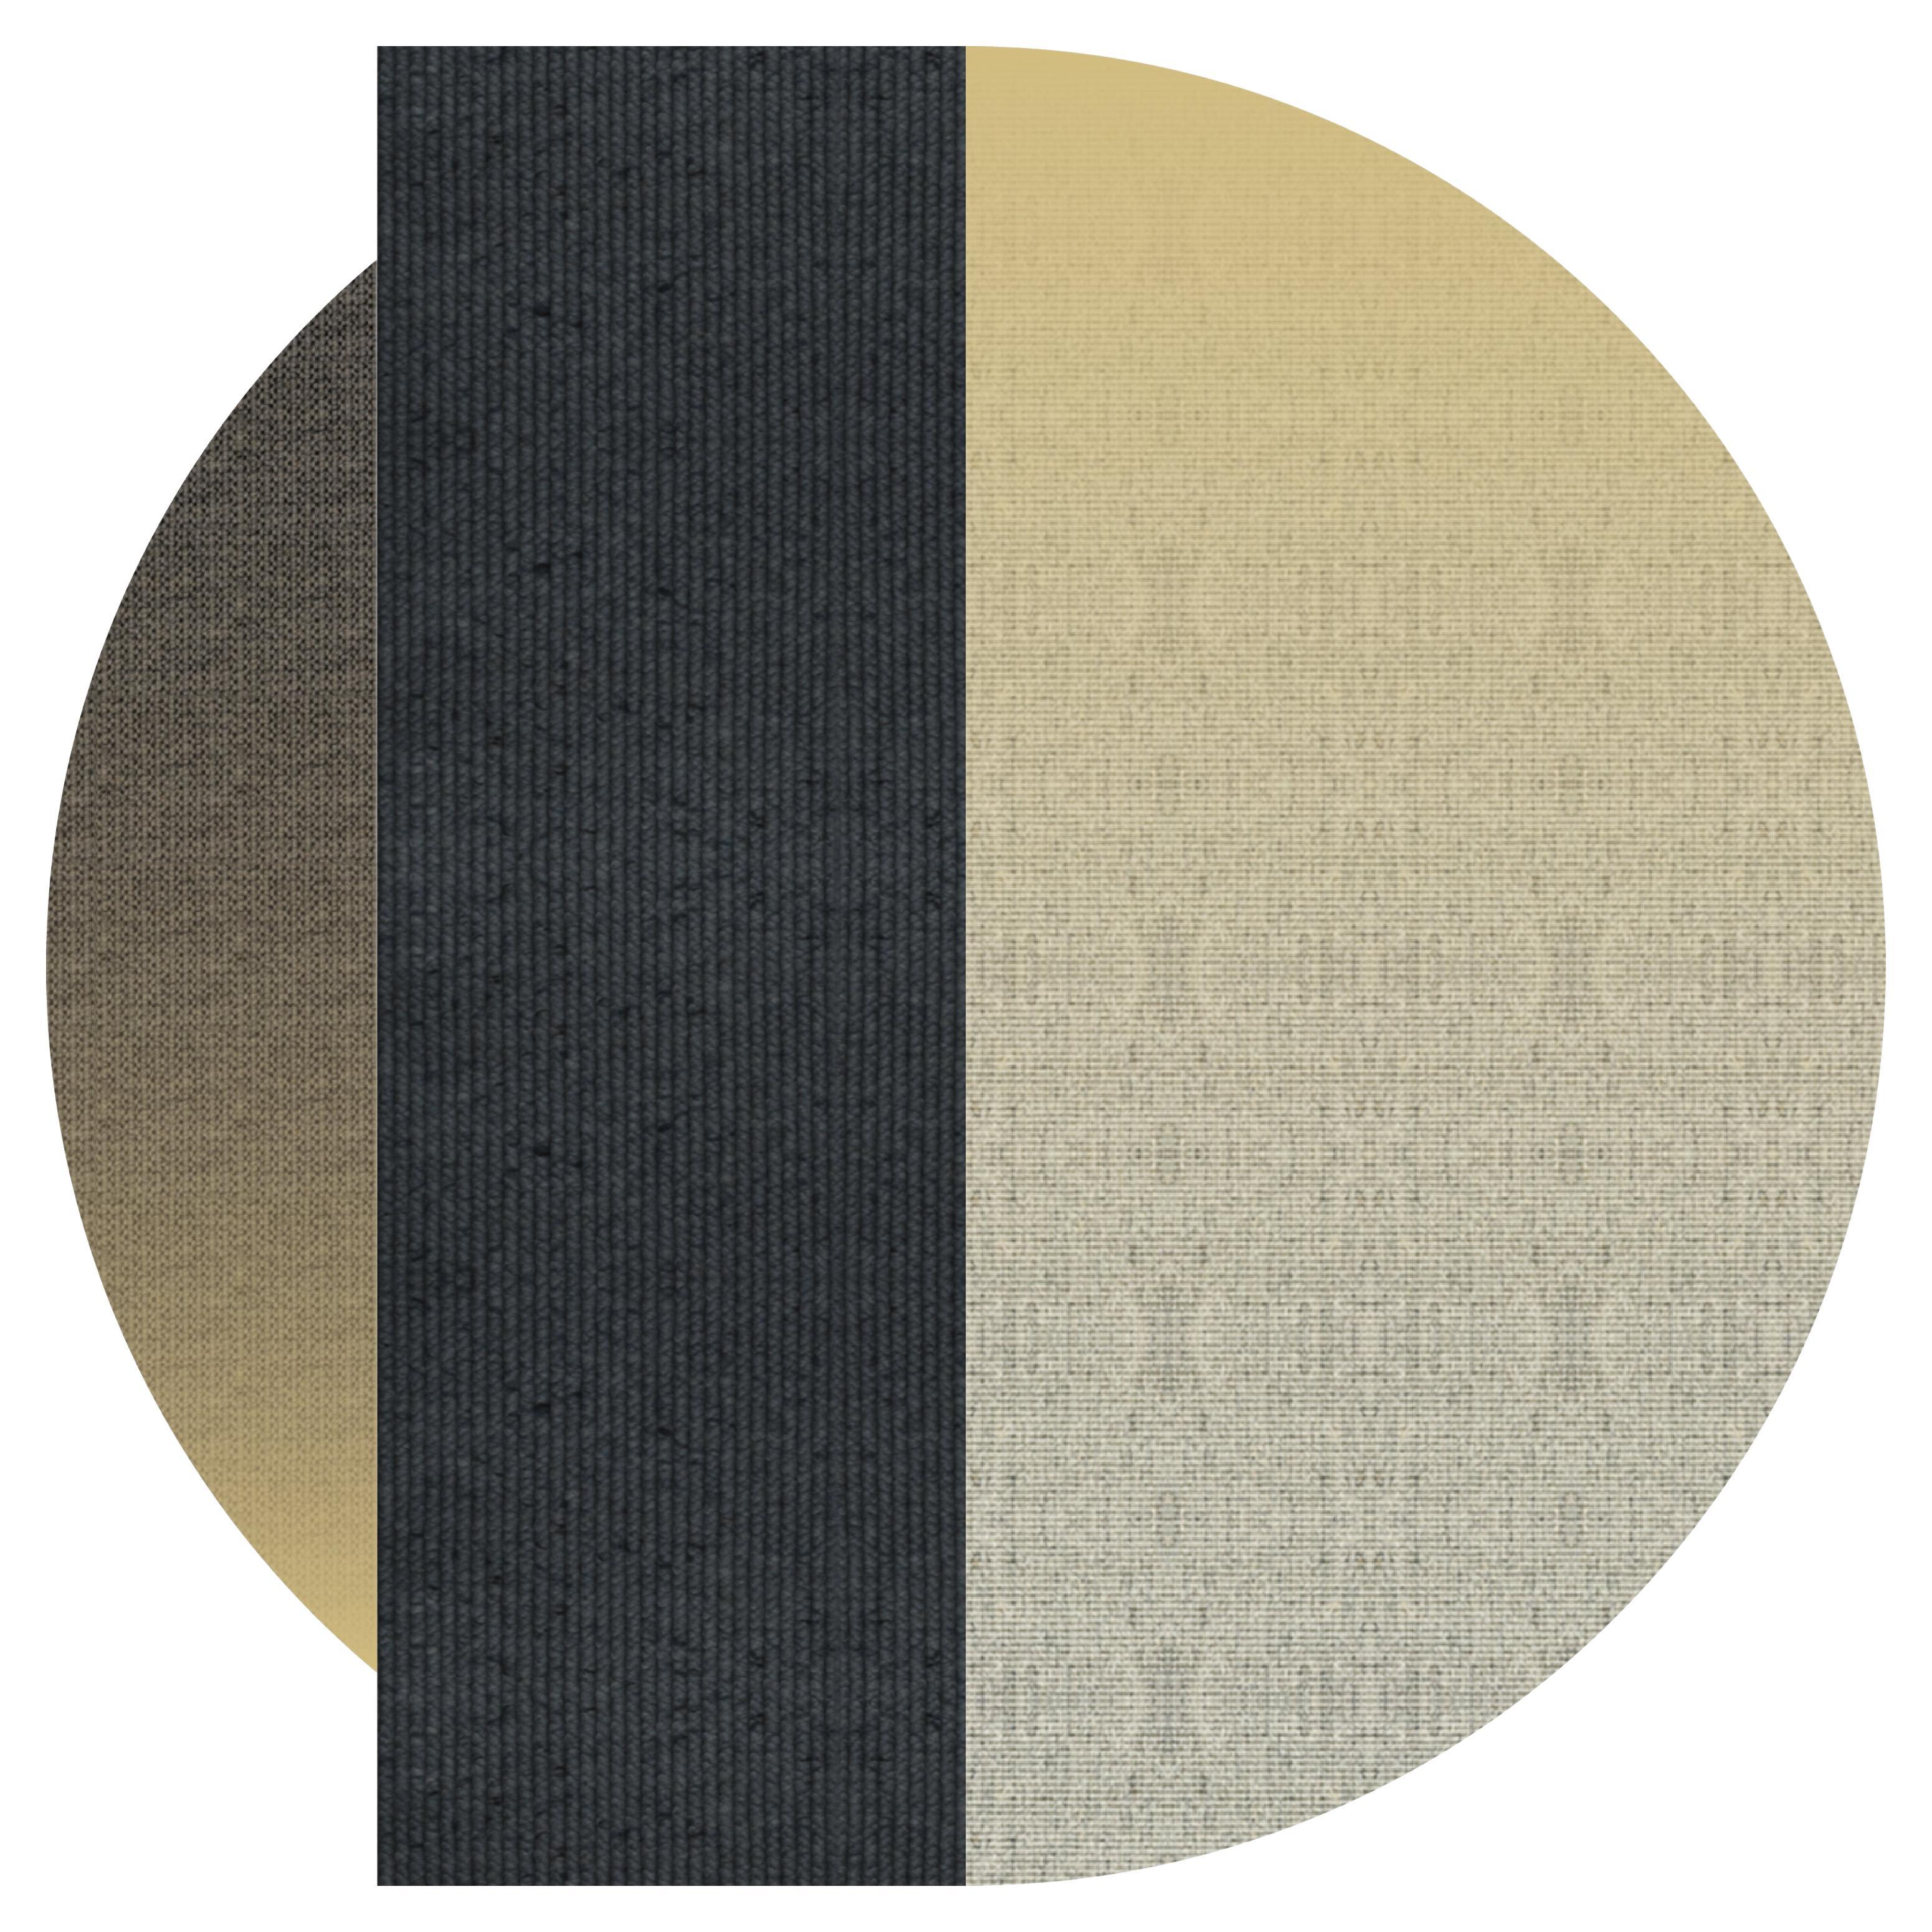 'Flux' Rug in Abaca, Colour 'Pampas', Ø 200cm by Claire Vos for Musett Design For Sale